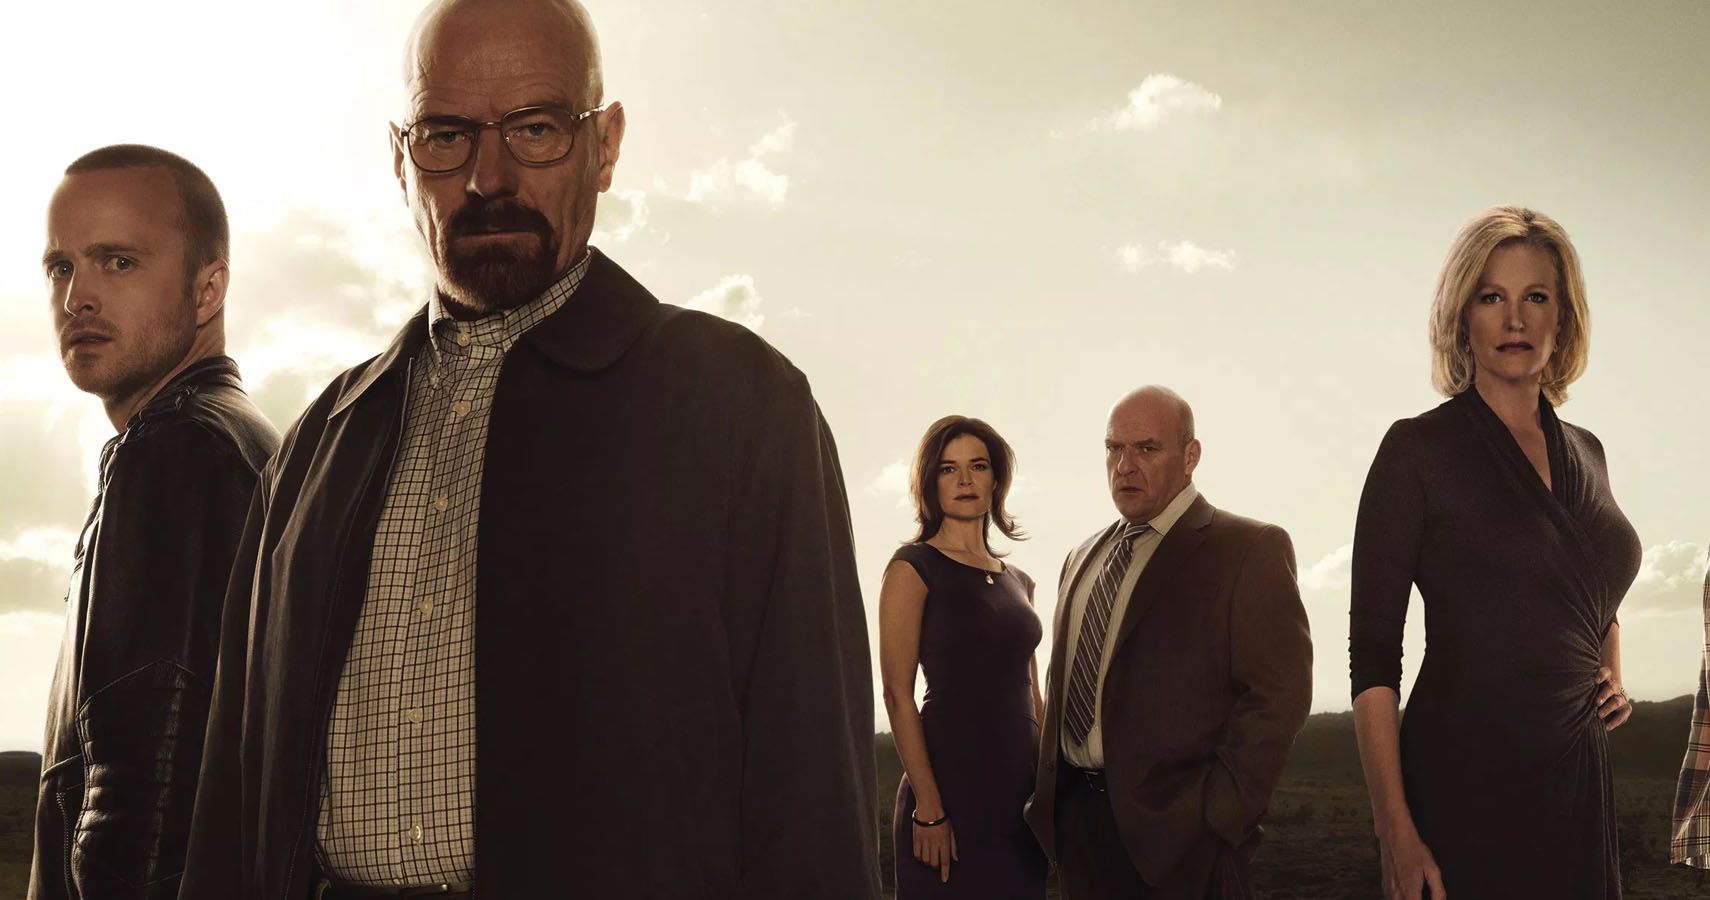 10 Breaking Bad Character Spinoffs We Still Want To See NEXT Better Call Saul Season 5 Wont Premiere Until 2020